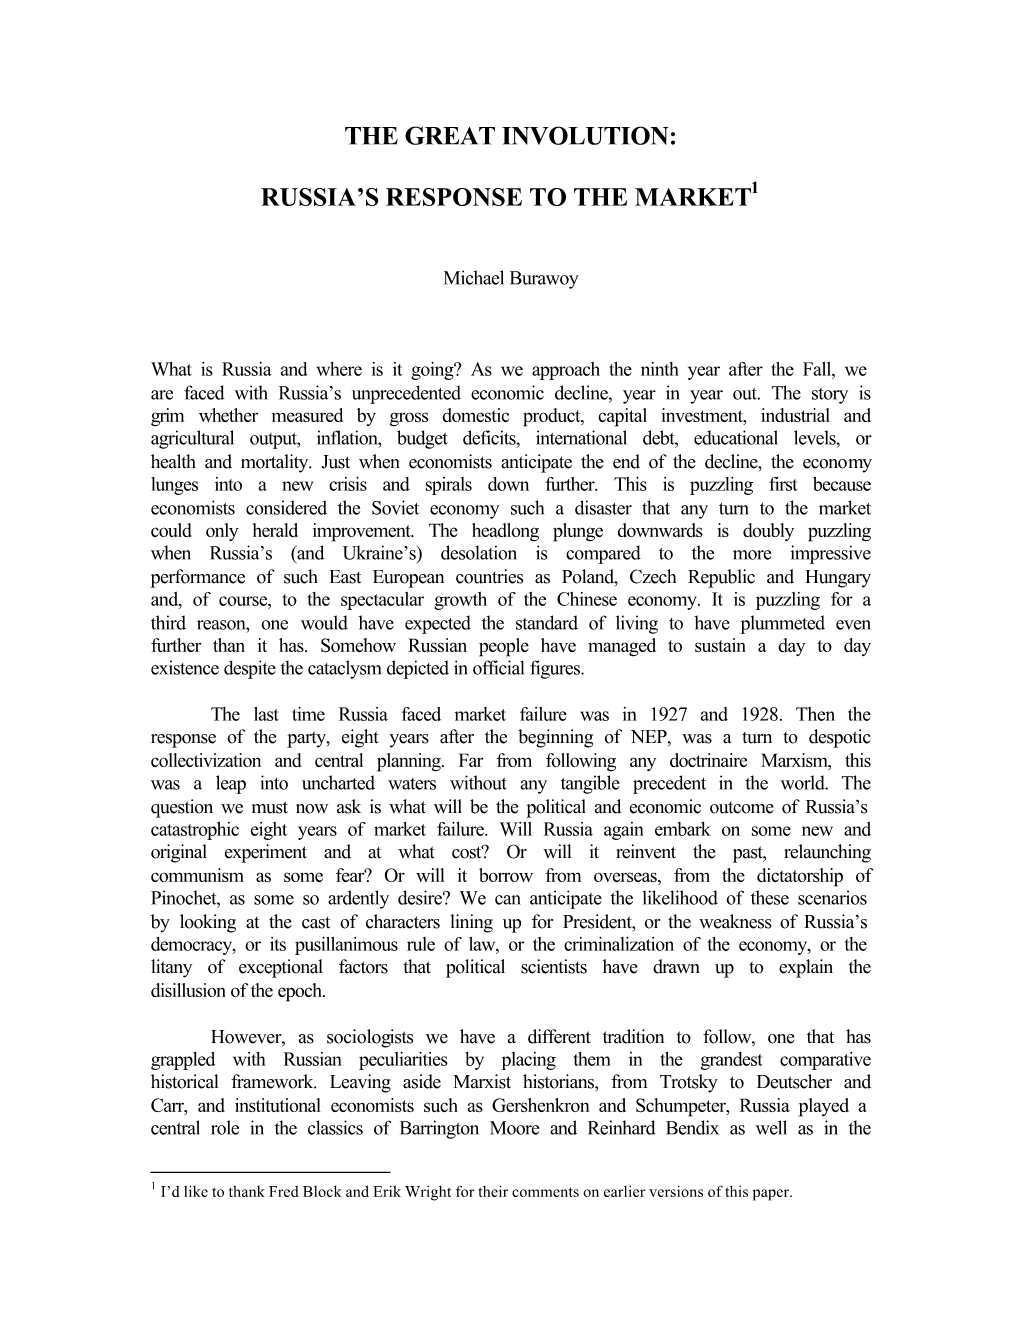 The Great Involution: Russia's Response to the Market